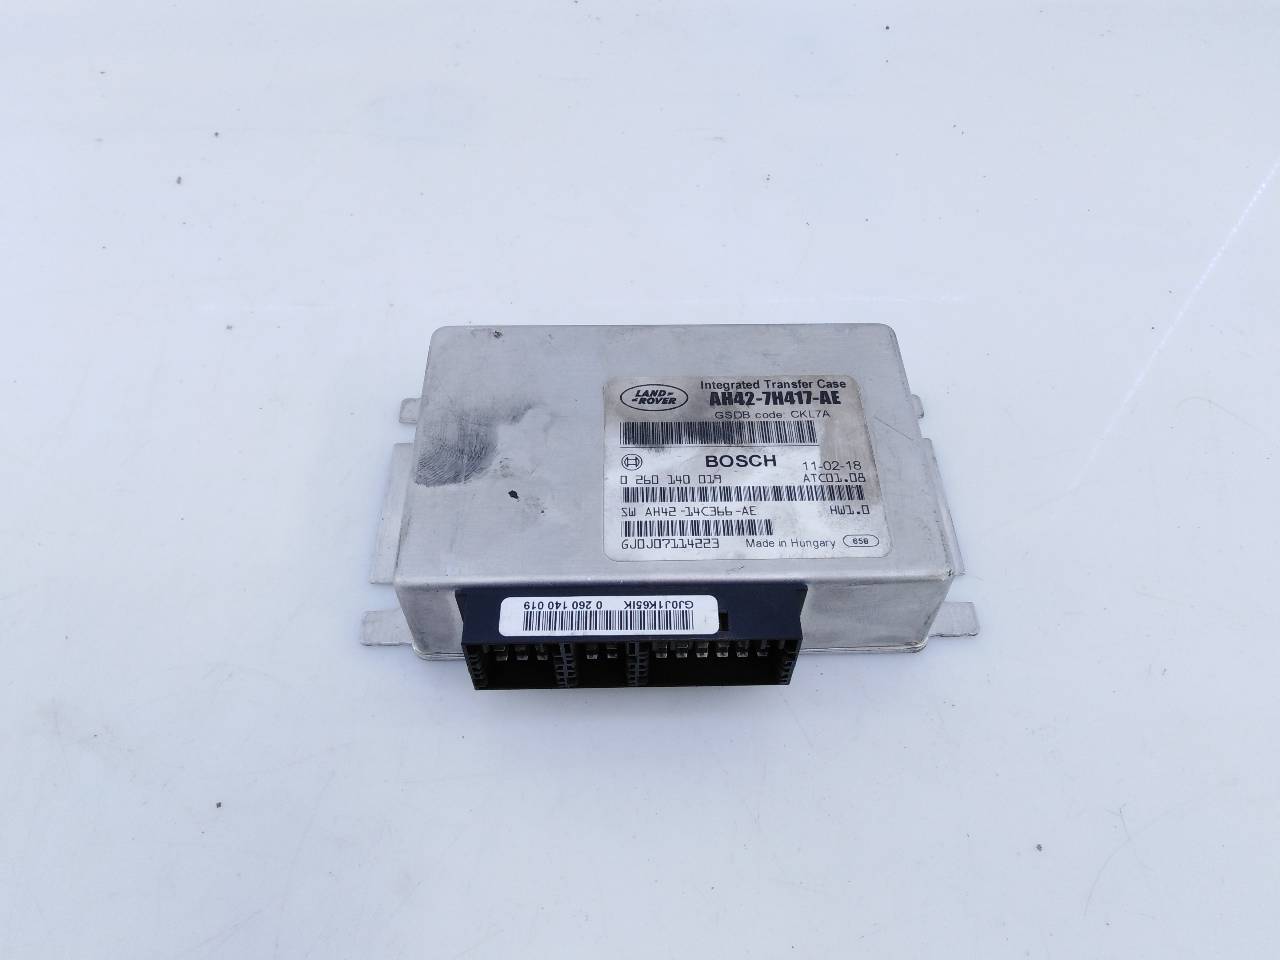 LAND ROVER Range Rover Sport 1 generation (2005-2013) Other Control Units AH427H417AE, 0260140019, E3-B3-8-2 18752971